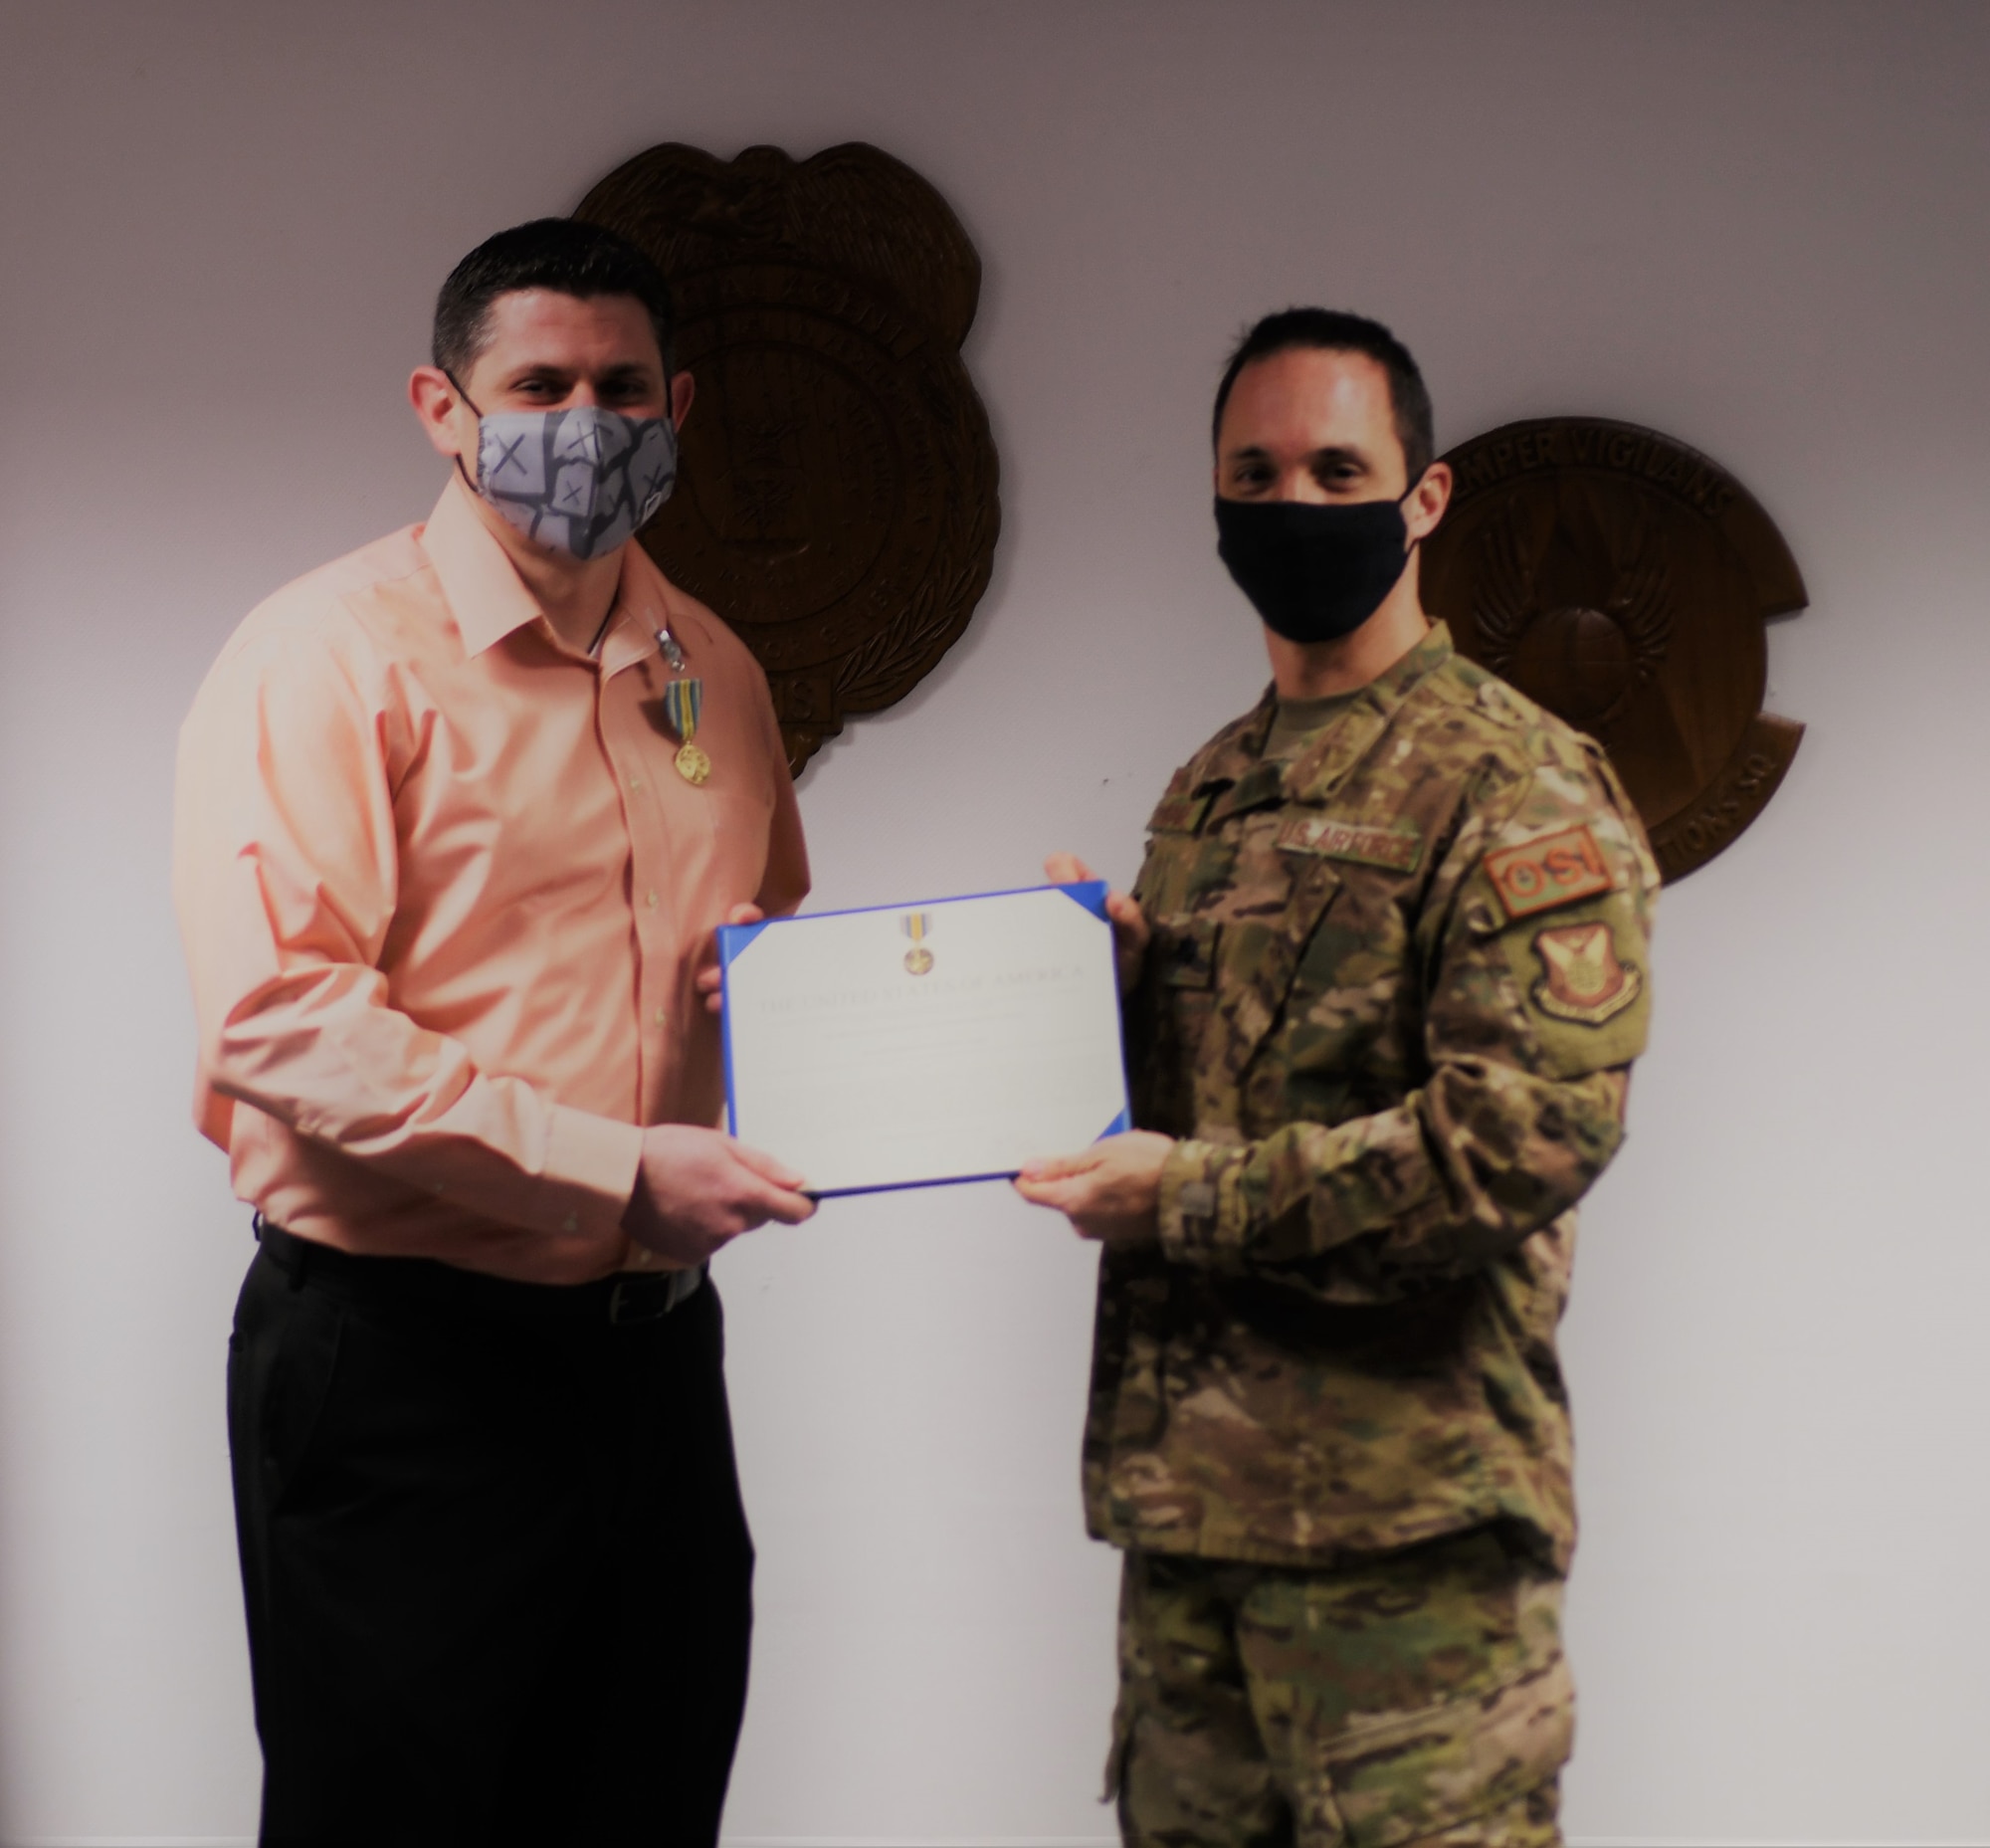 Special Agent Justin Acree accepts the Military Outstanding Volunteer Service Medal from OSI 4th Field Investigations Squadron Commander, Lt. Col. John Longmire Nov. 23, 2020. SA Acree spearheaded a volunteer effort resulting in the manufacture of 11,349 reusable masks for communities across Germany. SA Acree personally made 1,556 face coverings to help cope with the COVID-19 pandemic. (Photo by SA Phillip Santomauro, 4 FIS)